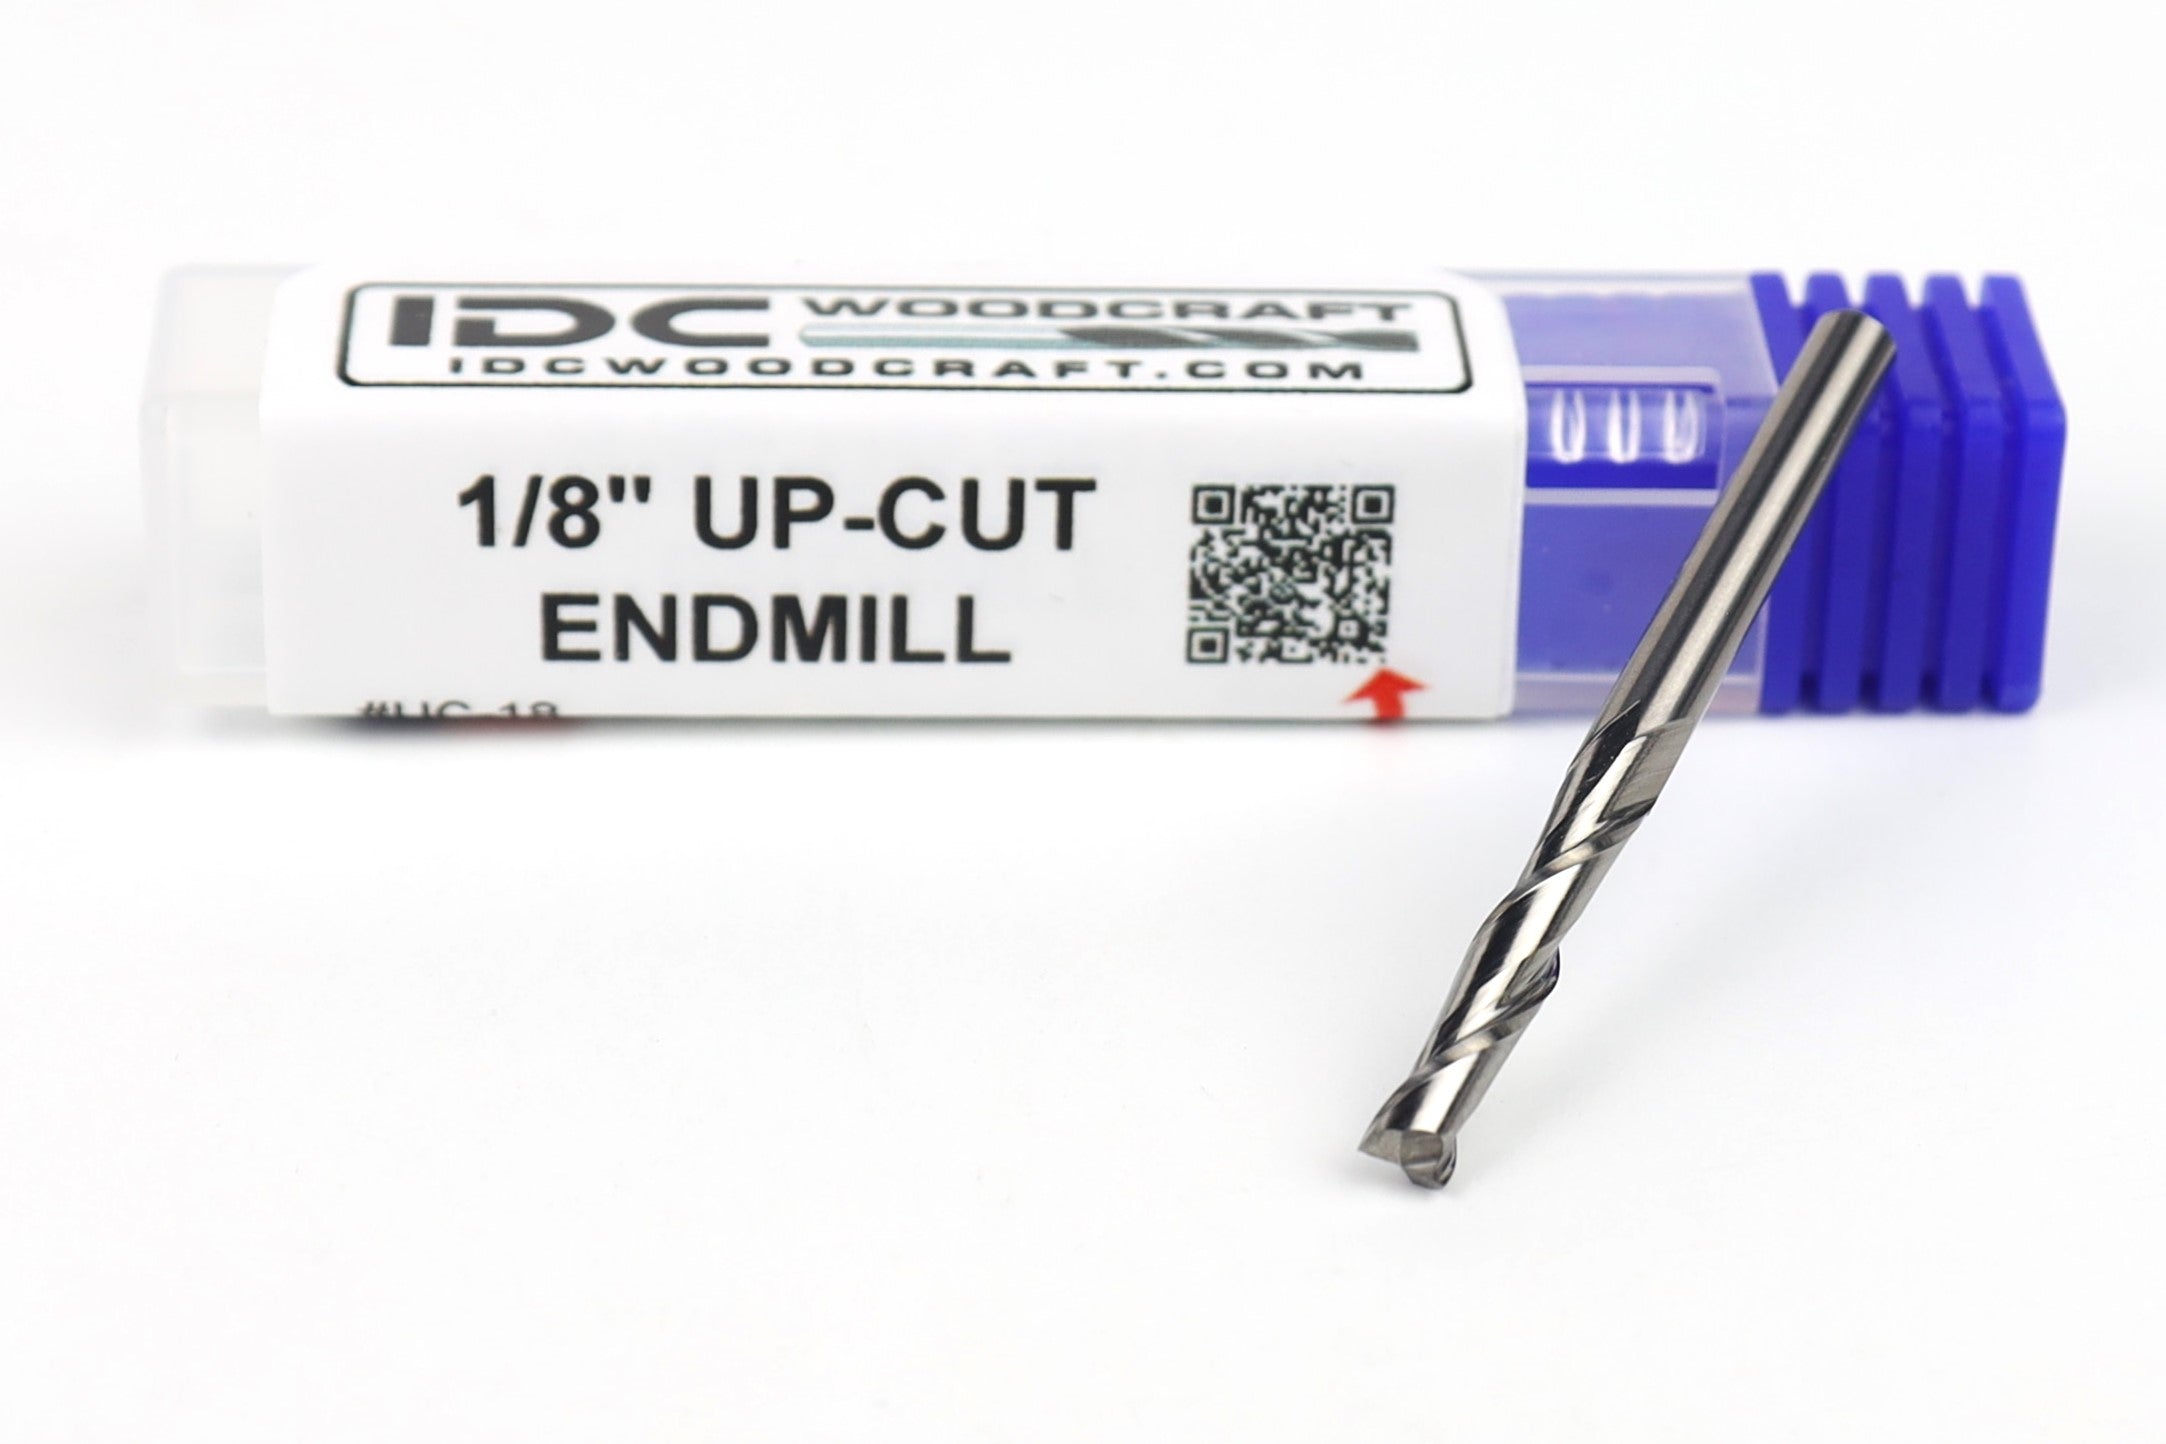 1/8" Up-Cut Endmill Bit (Drilling Capable) For CNC Routers (set of 2)